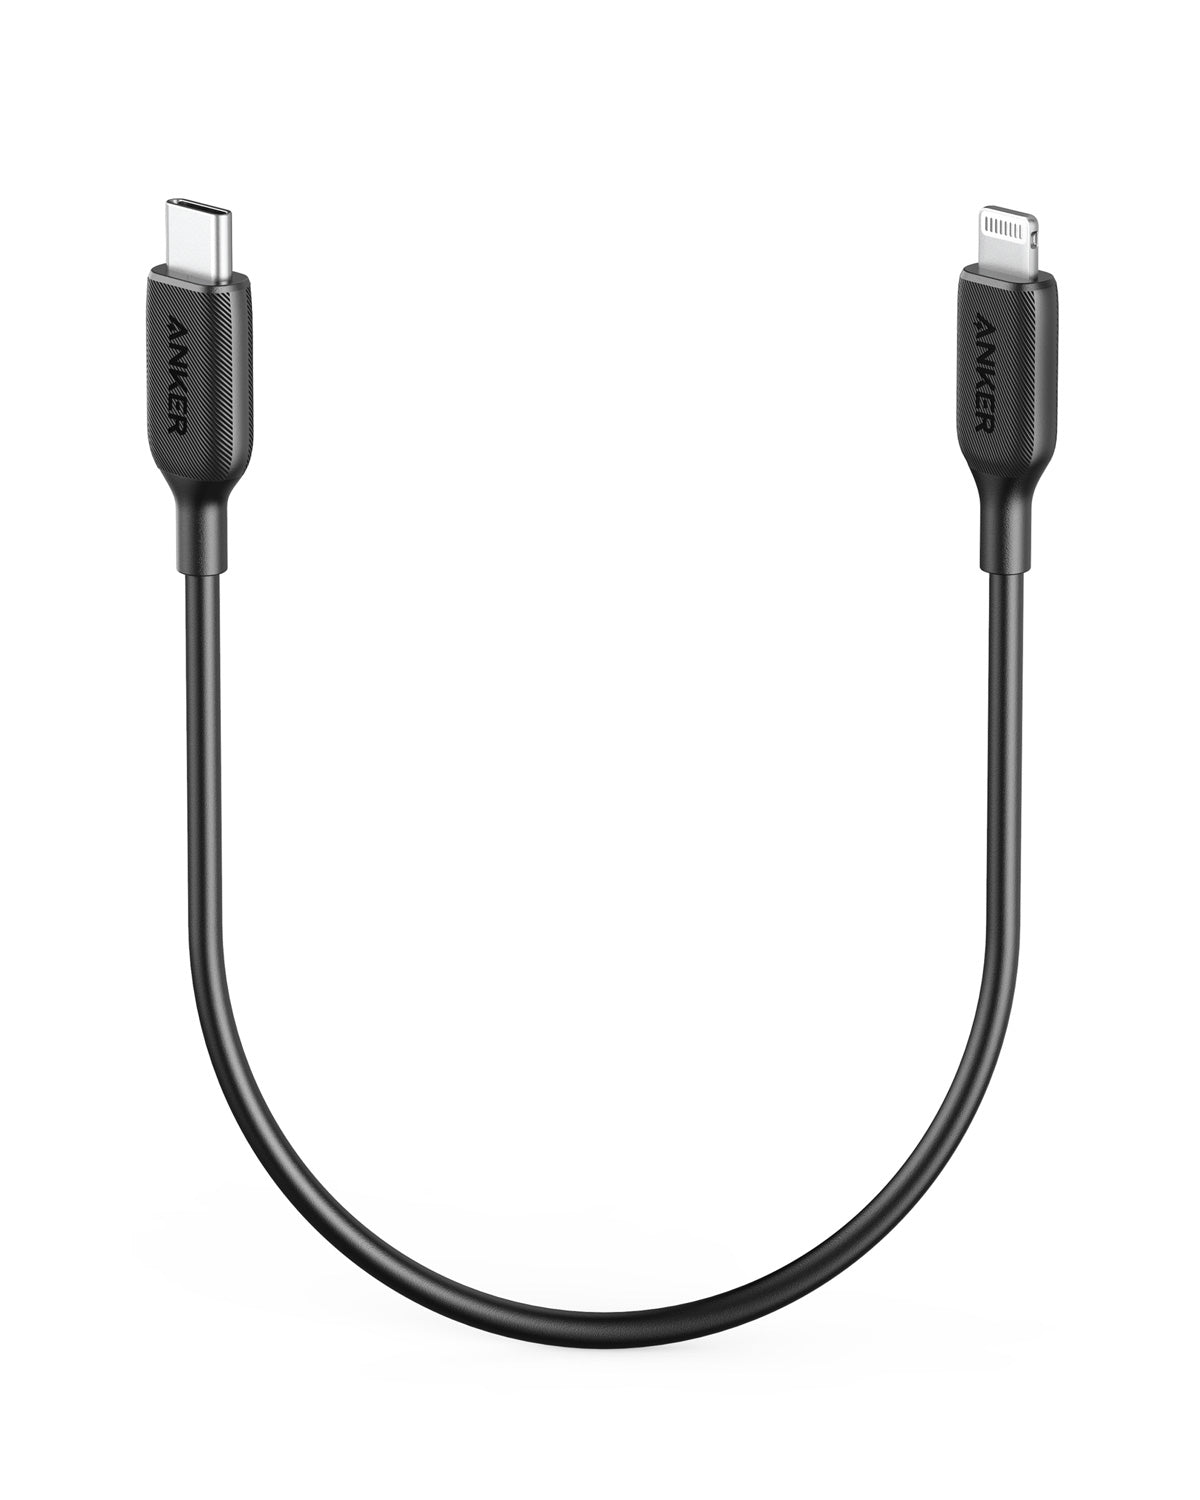 Cable lightning a USB-C 1 metro - Think